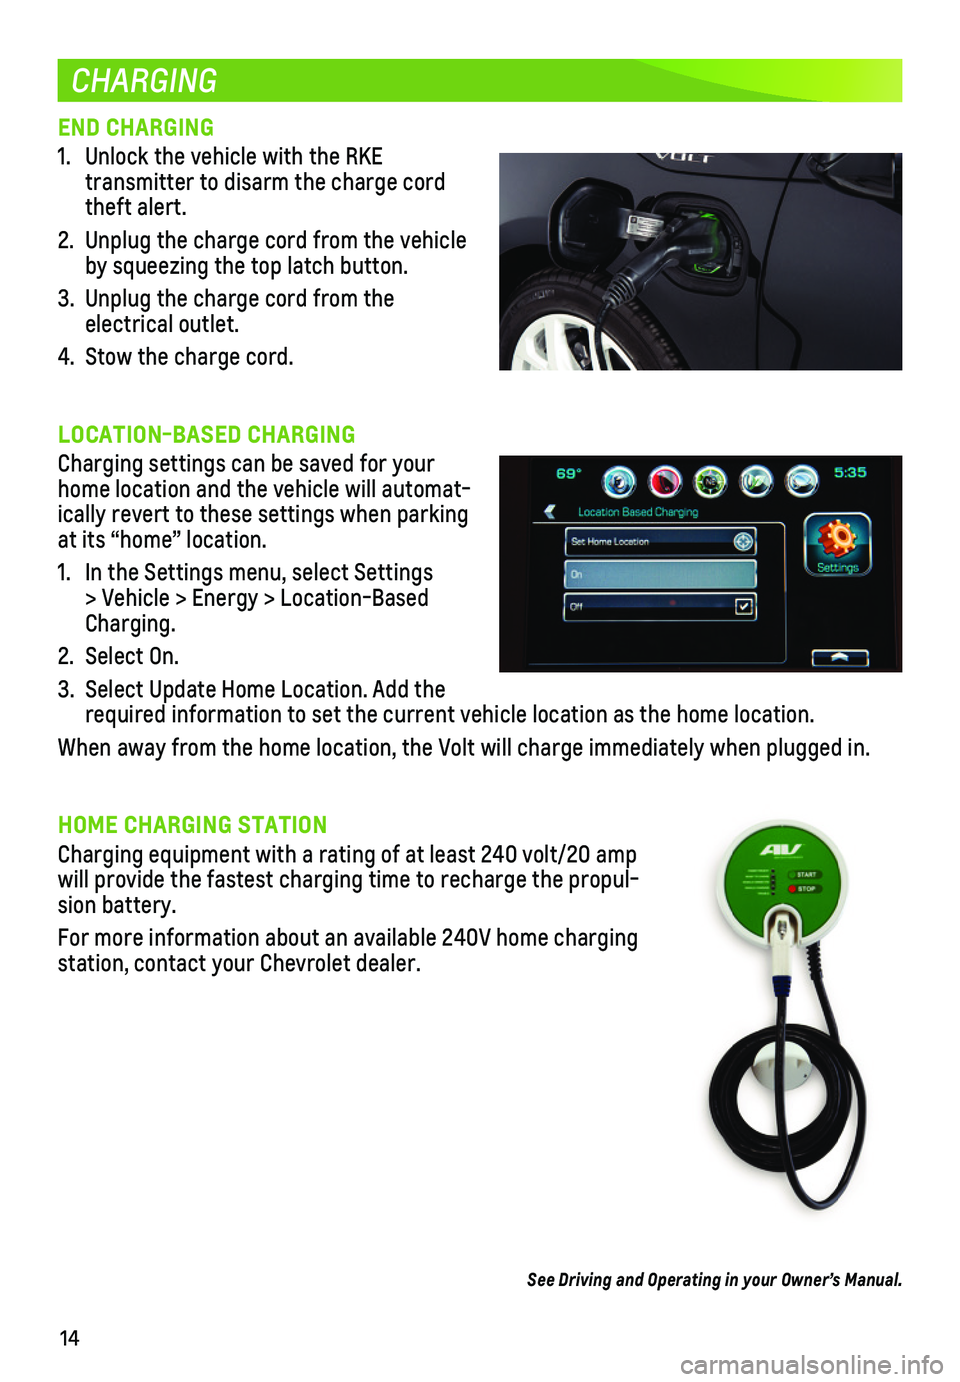 CHEVROLET VOLT 2018  Get To Know Guide 14
CHARGING
END CHARGING
1. Unlock the vehicle with the RKE  
transmitter to disarm the charge cord theft alert.
2. Unplug the charge cord from the vehicle by squeezing the top latch button.
3. Unplug